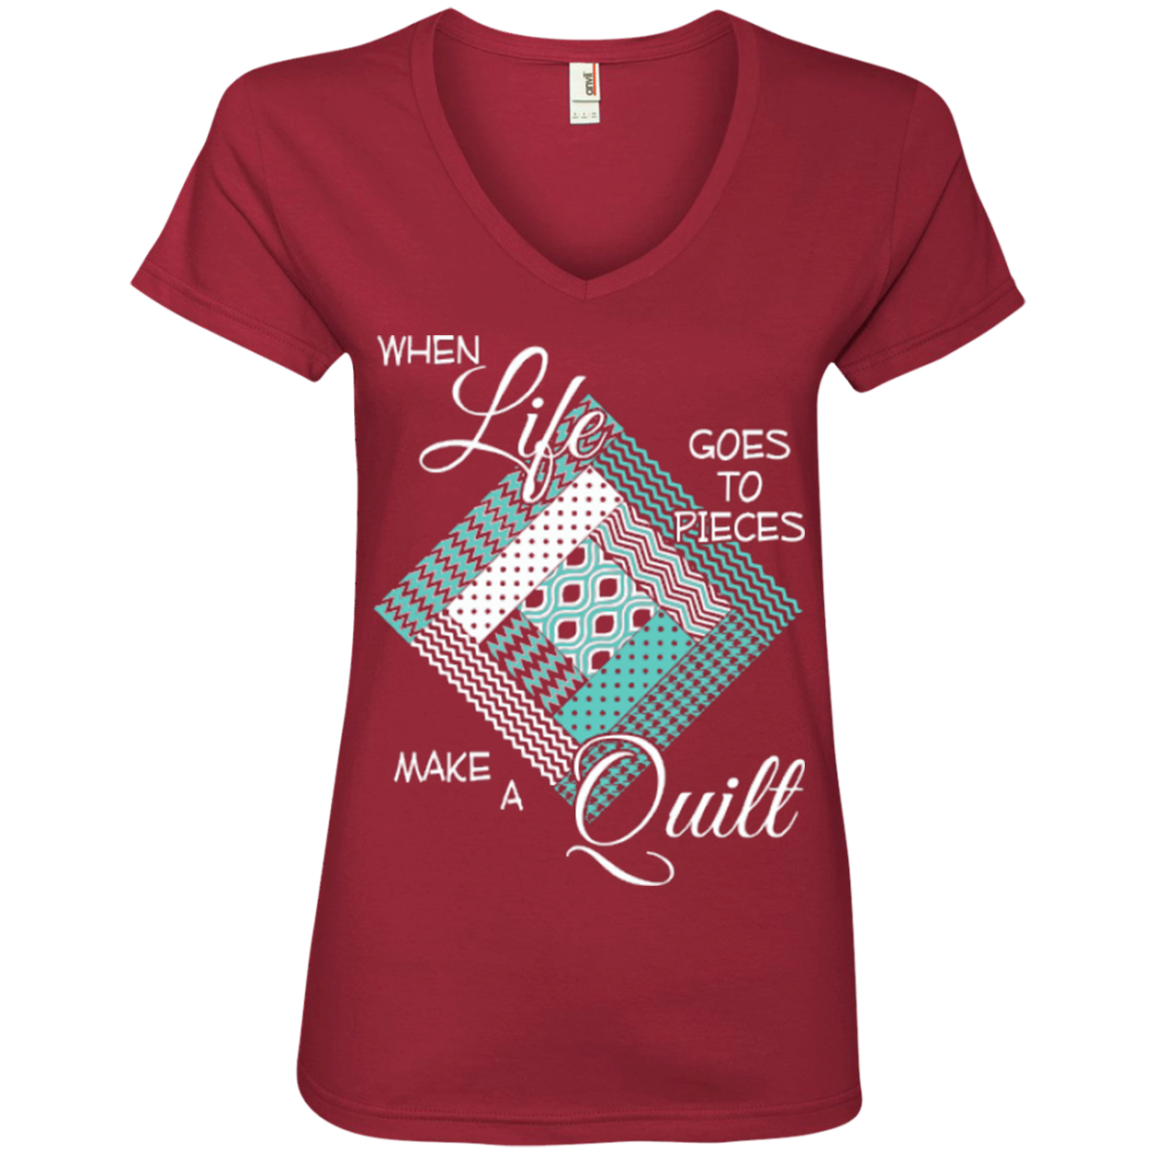 Make a Quilt (turquoise) Ladies V-Neck Tee - Crafter4Life - 3